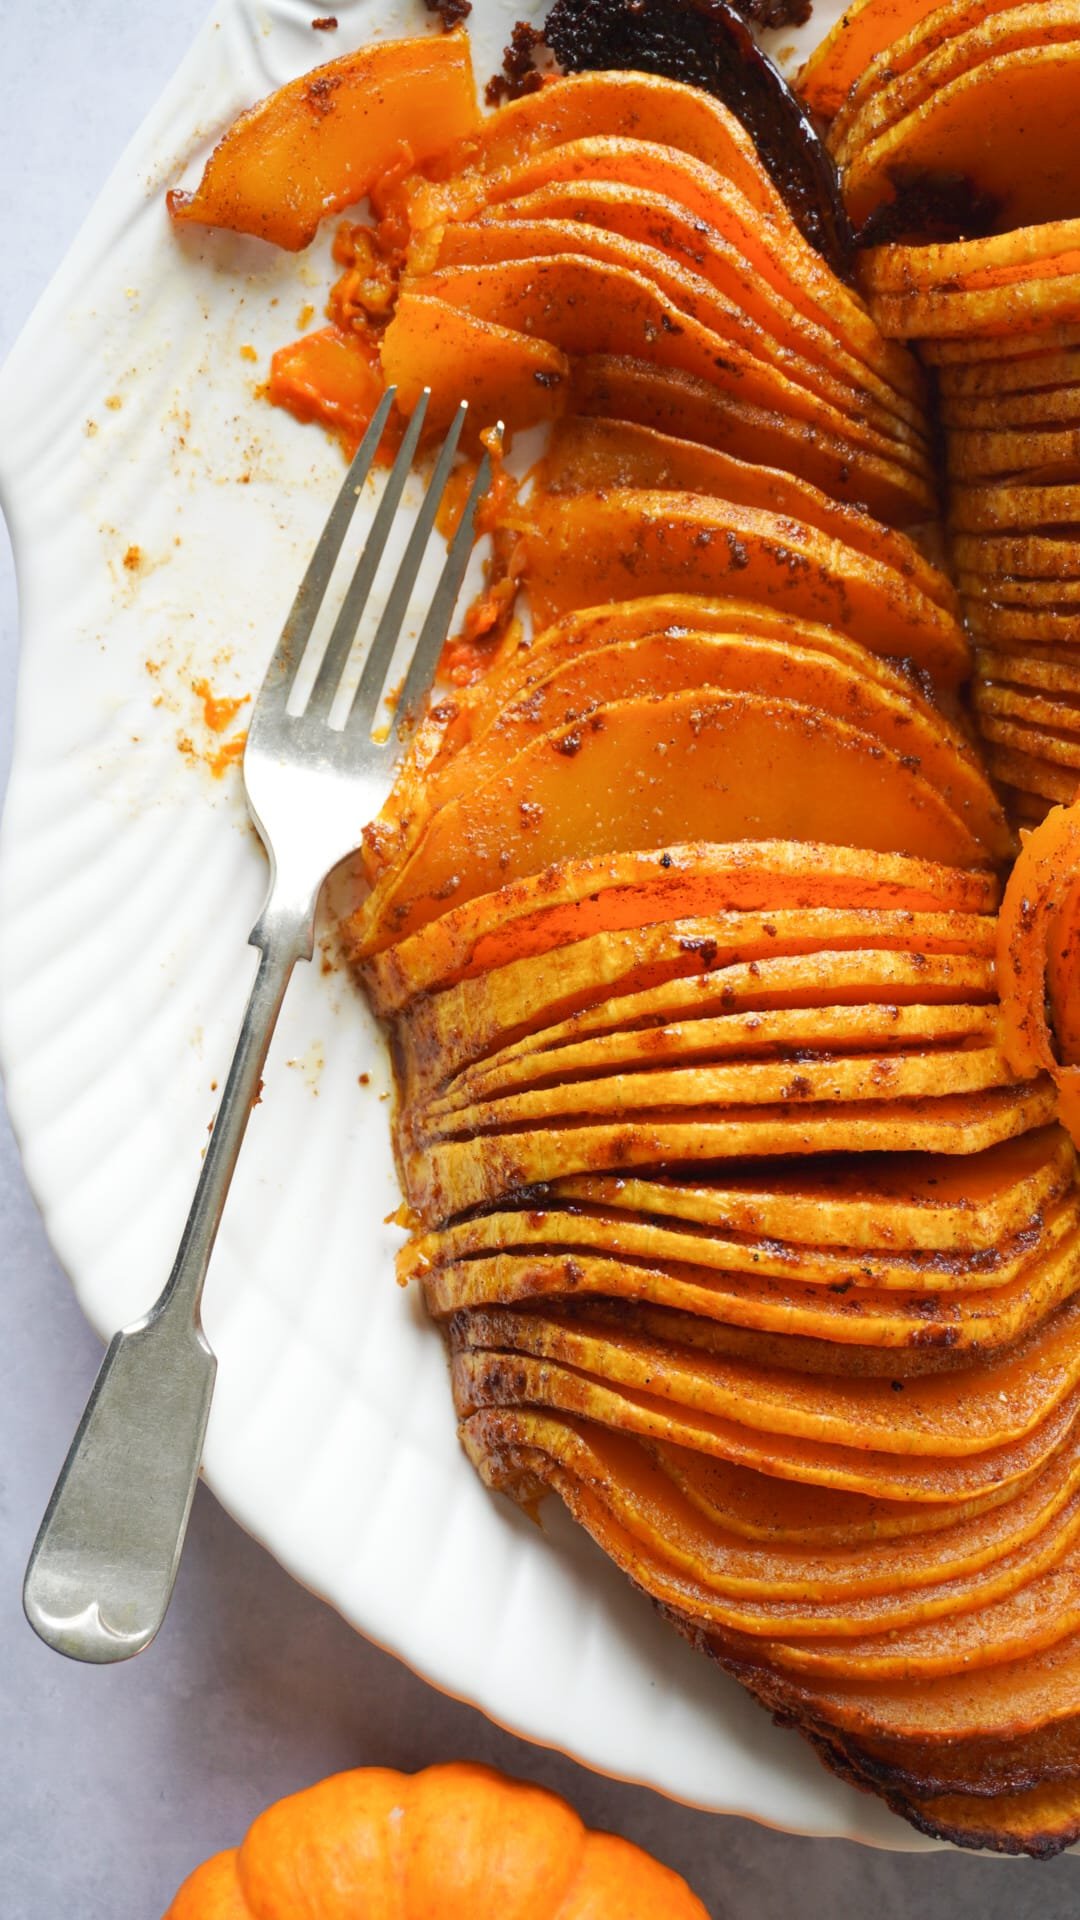 Sliced the hasselback way, your butternut squash will be the perfect center piece or side dish this Autumn.